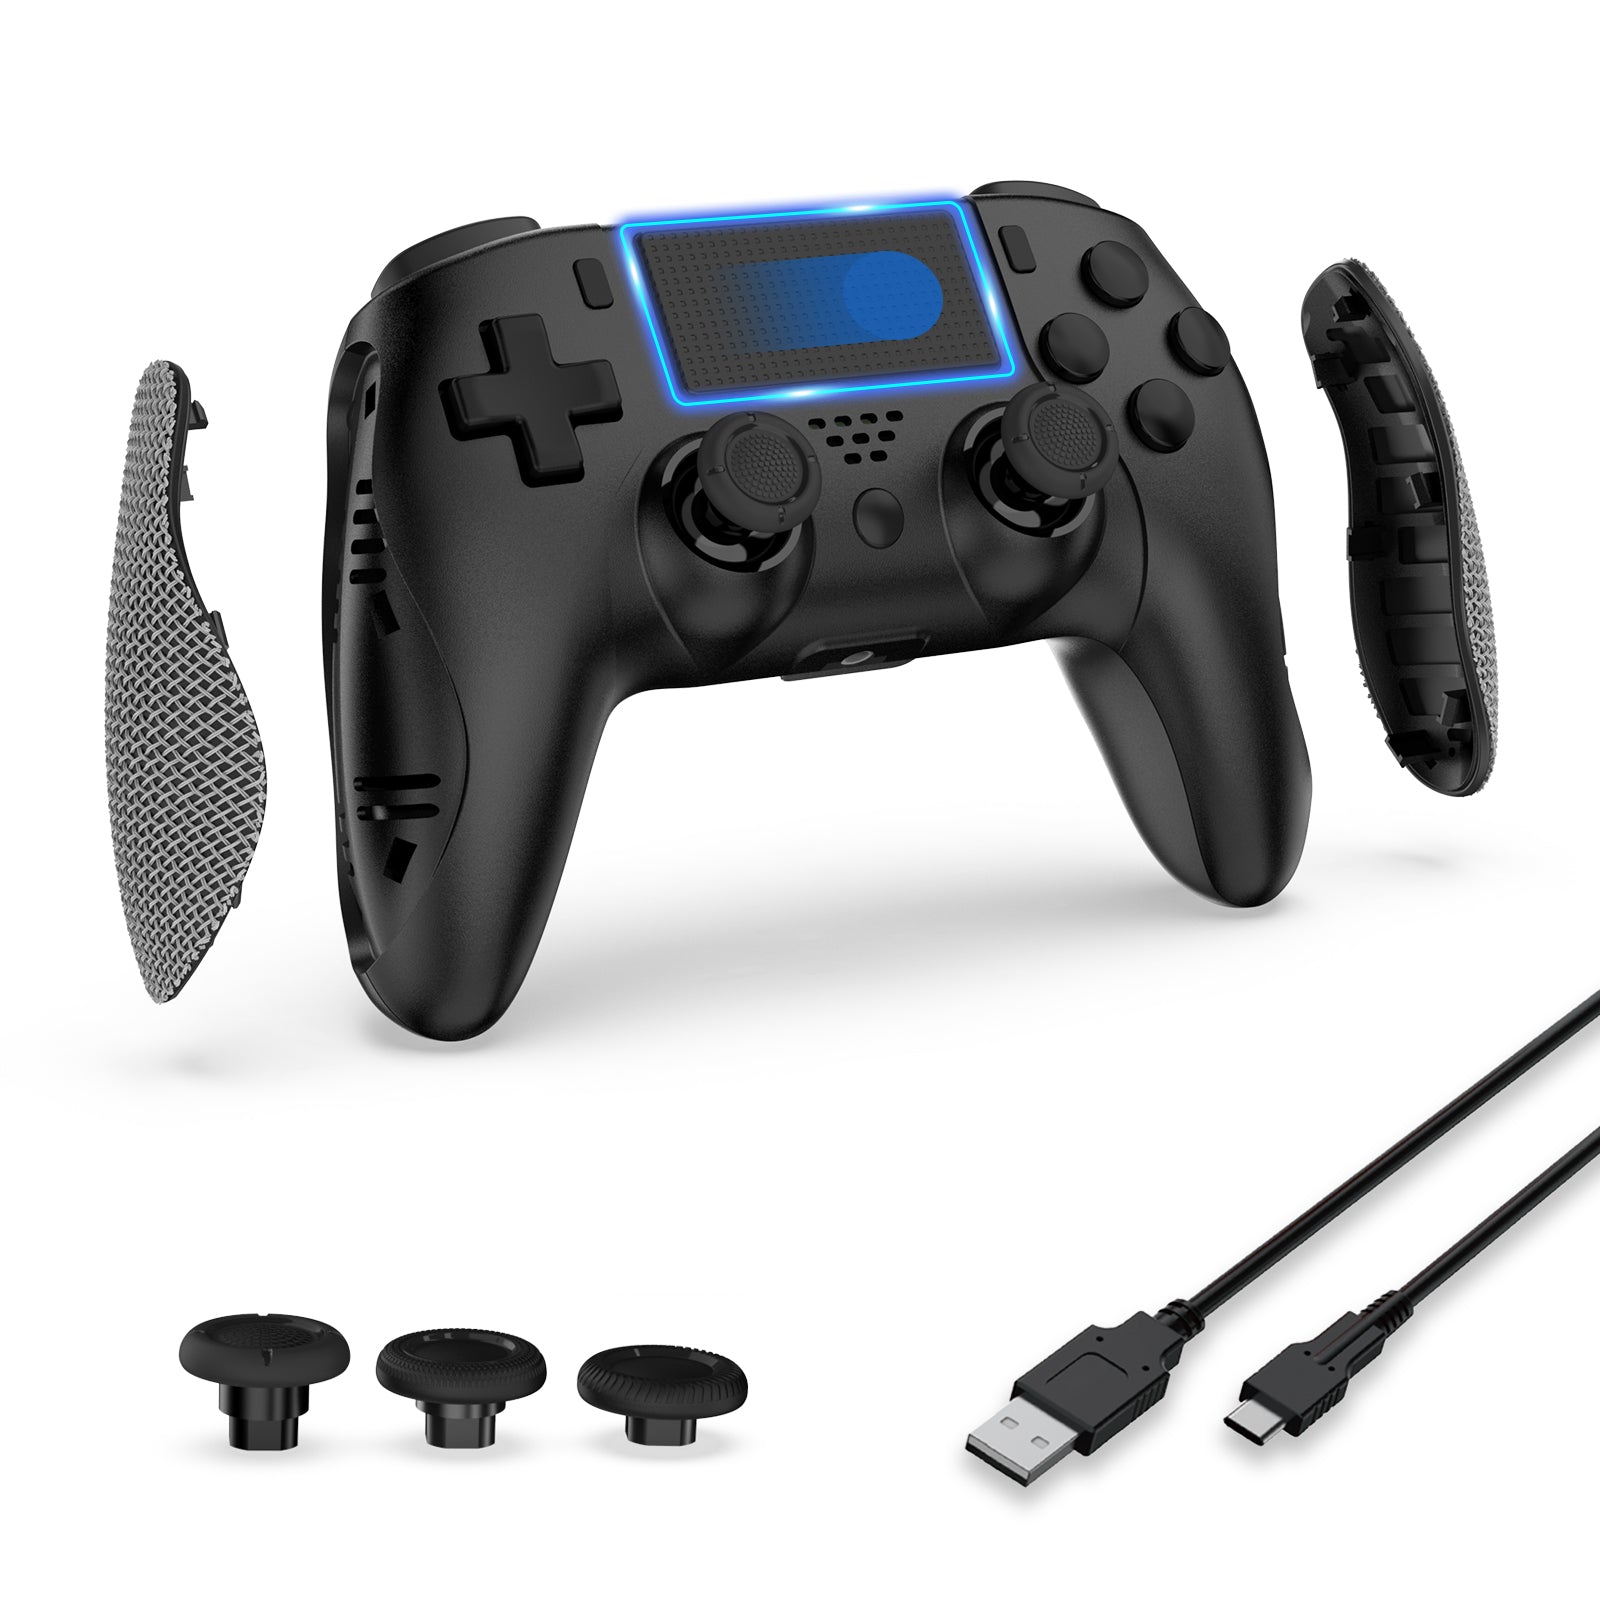 Black NexiGo Wireless Game Controller for PS4, PS4 Slim, PS4 Pro with stick caps and charging cable